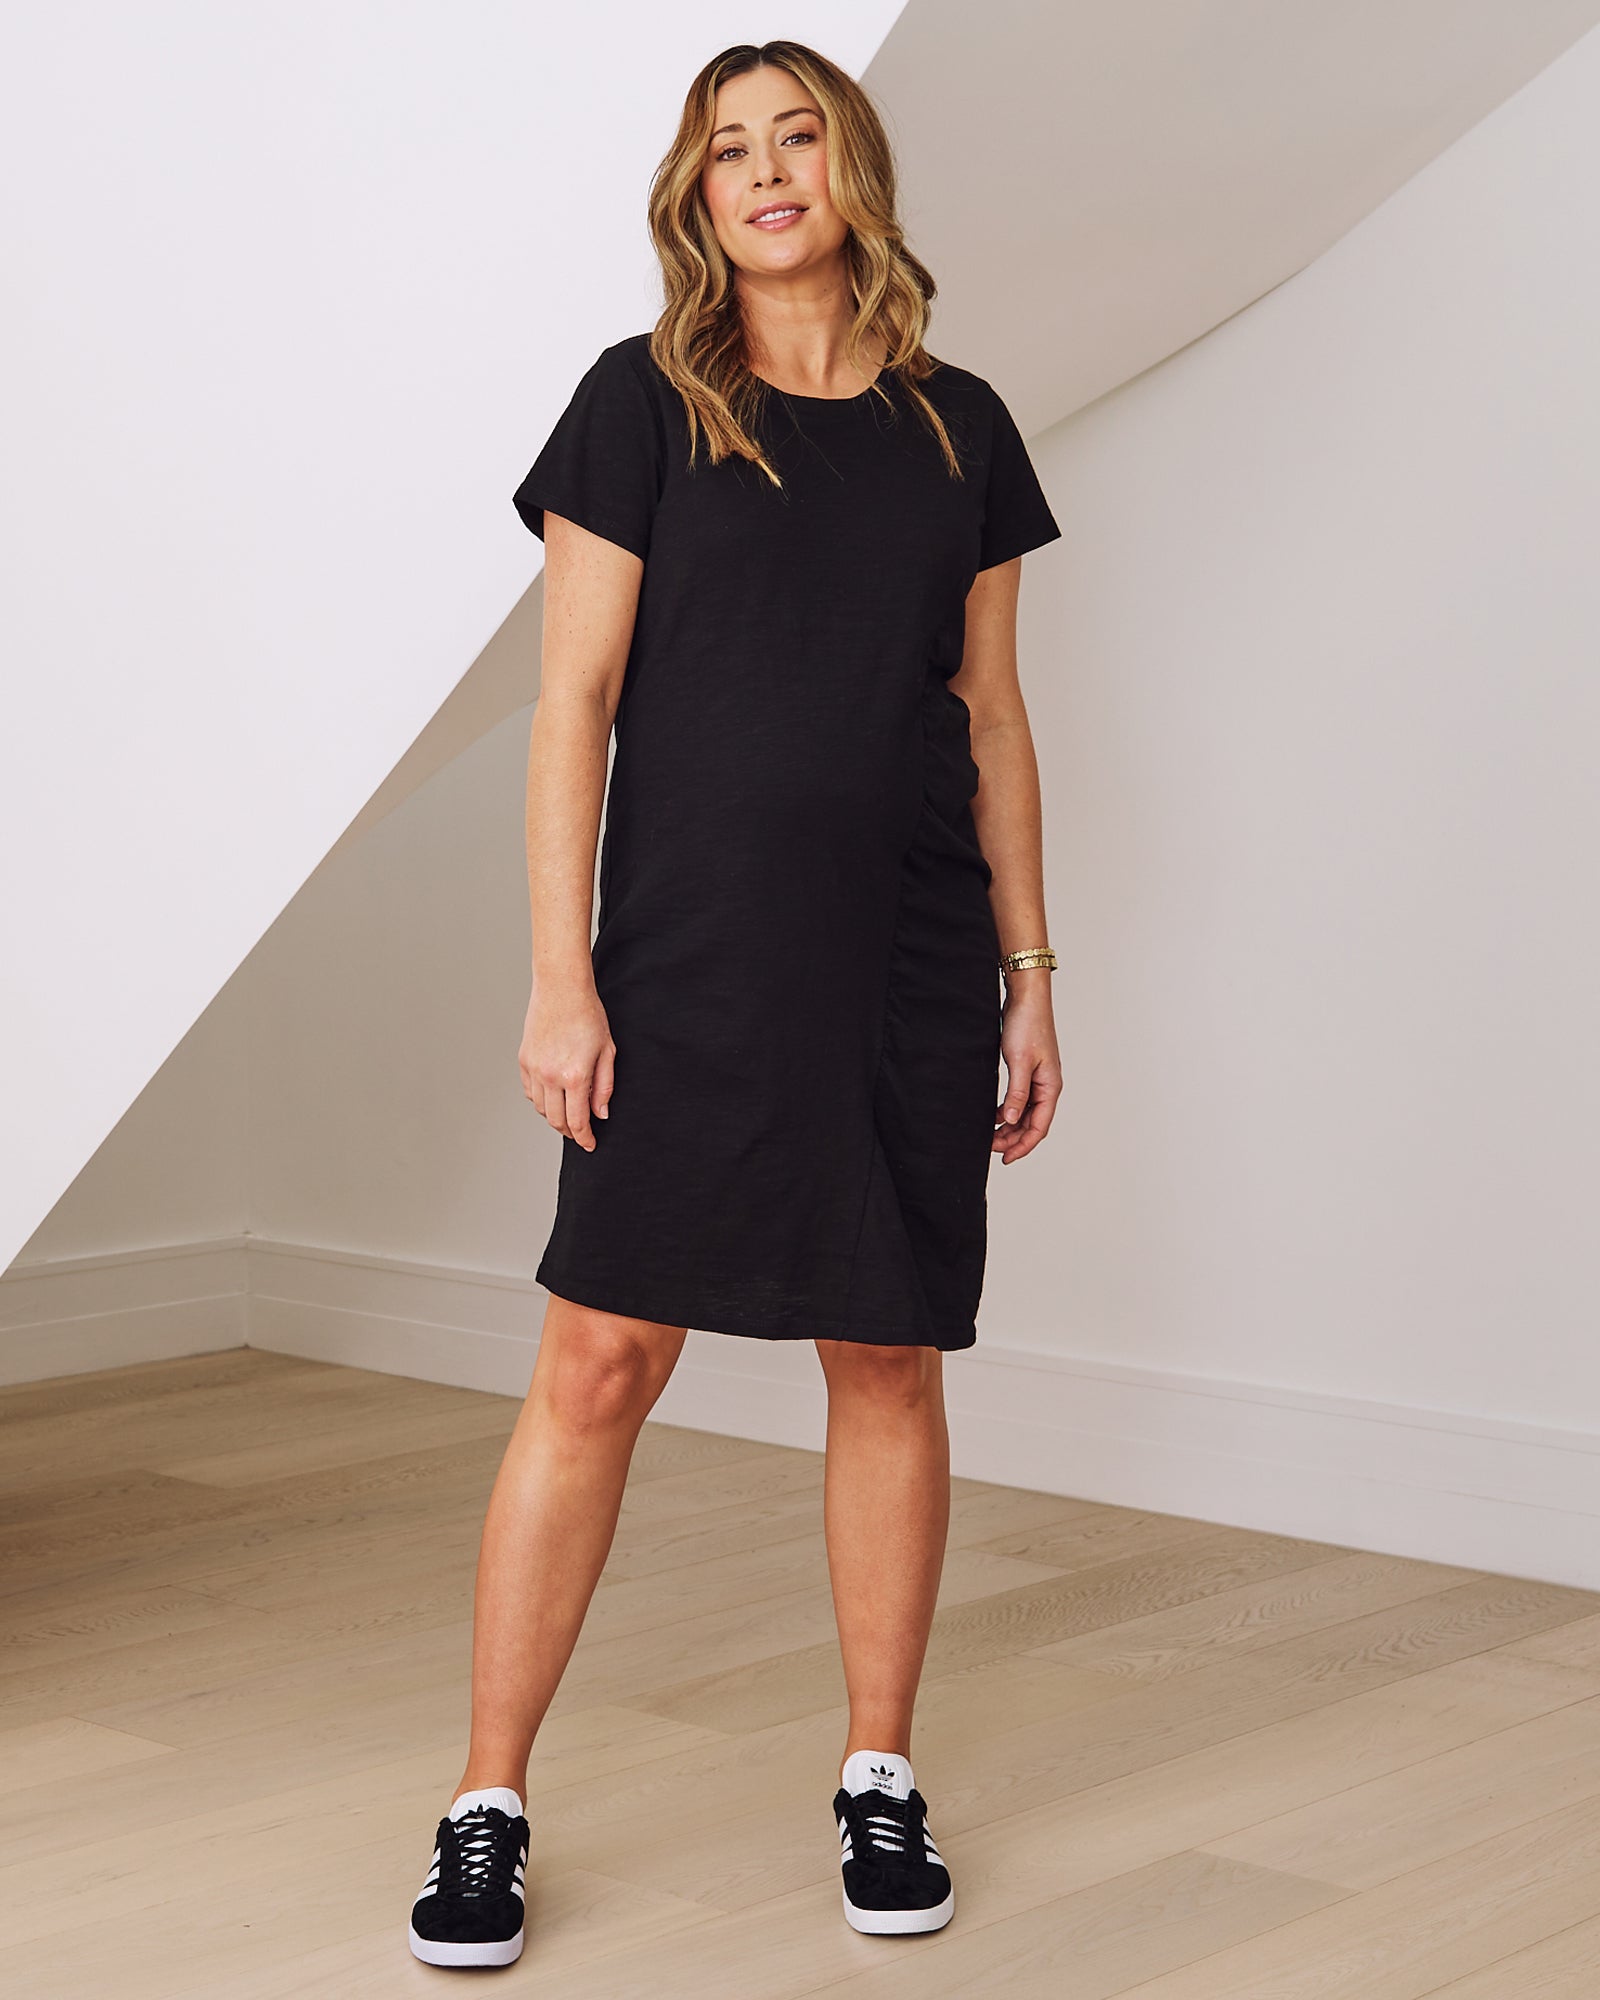 Front view- maternity t shirt dress in black